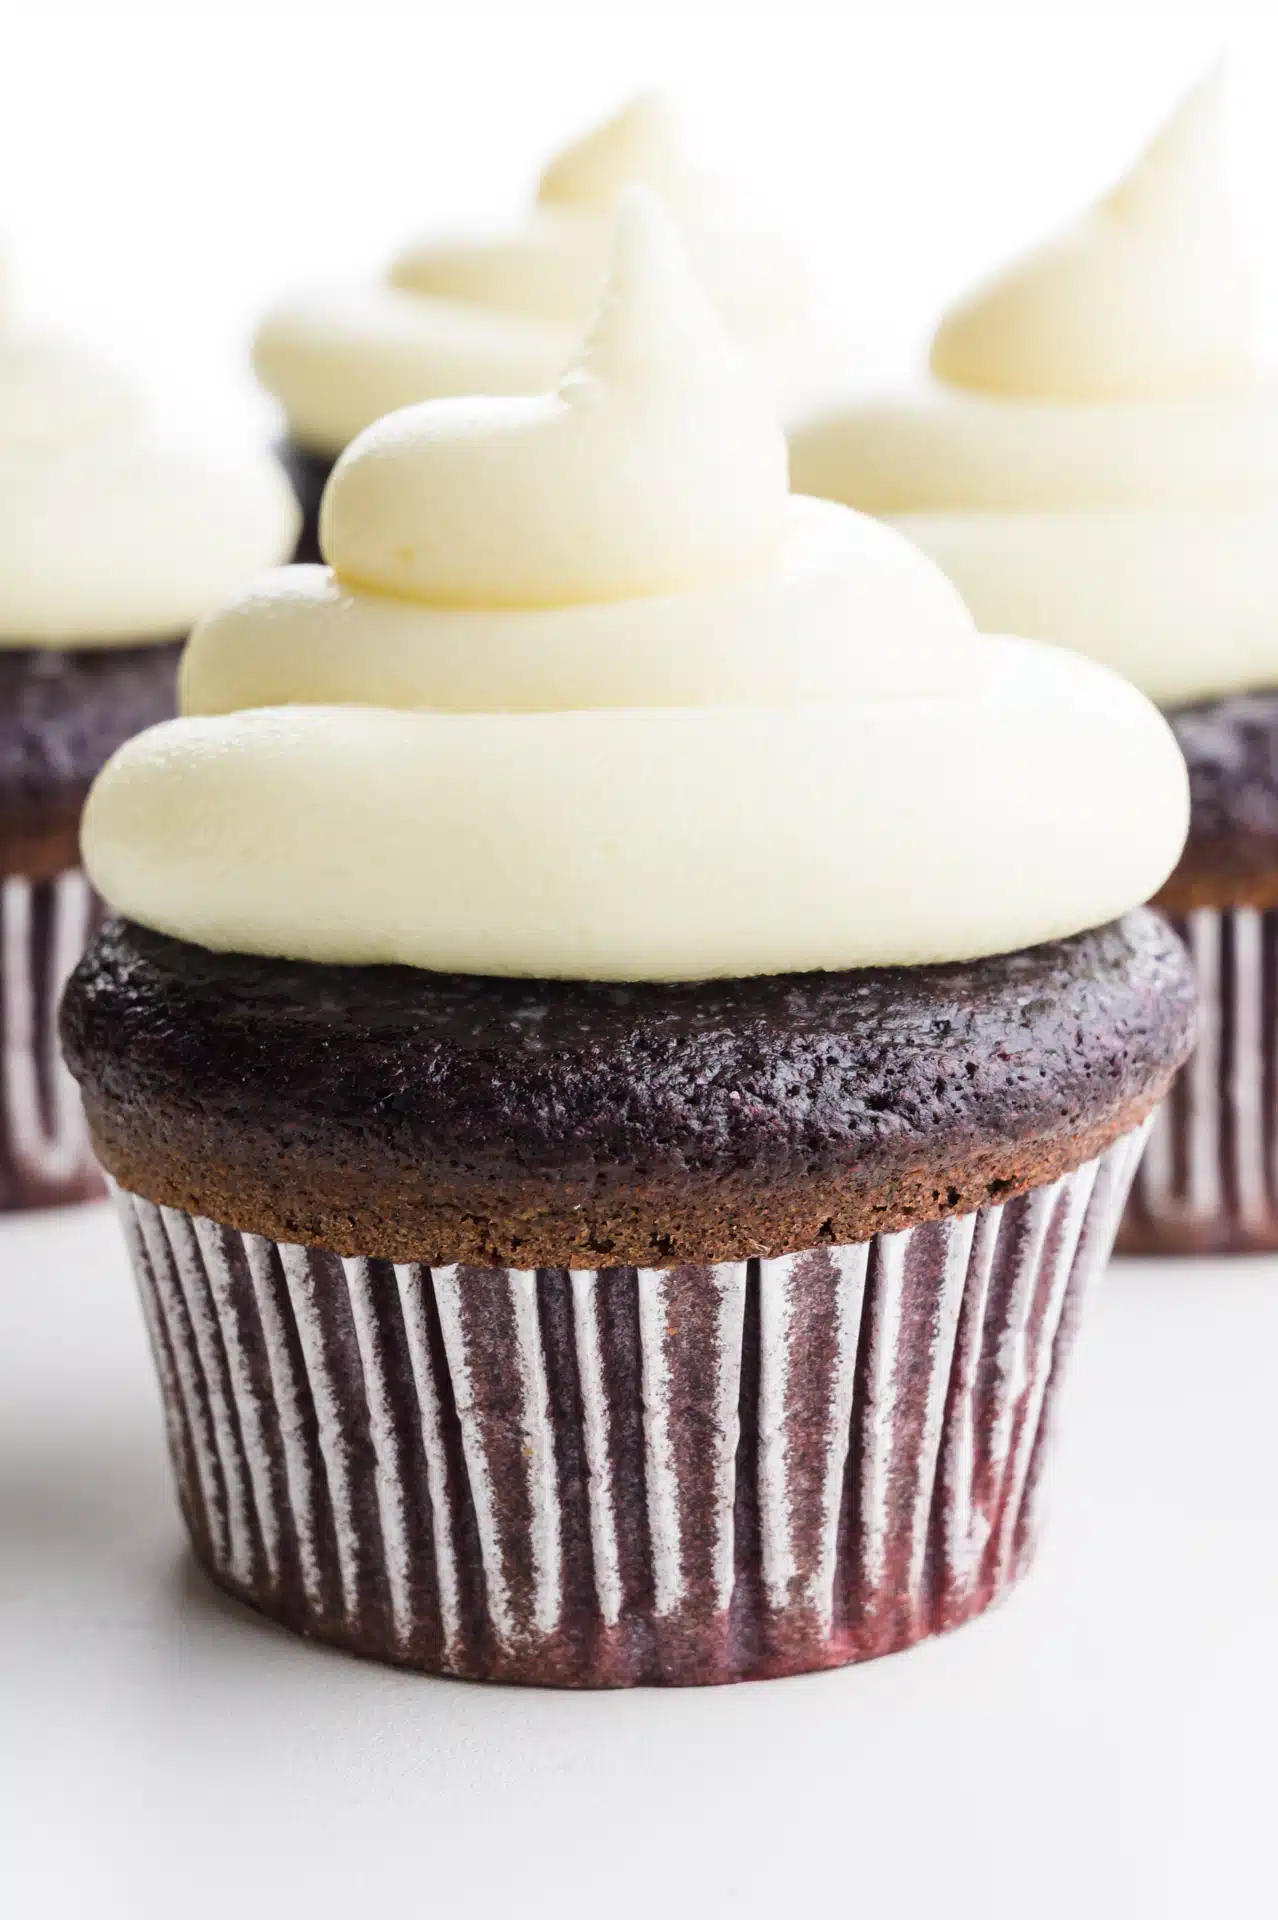 A red velvet cupcake is topped with lots of cream cheese frosting.